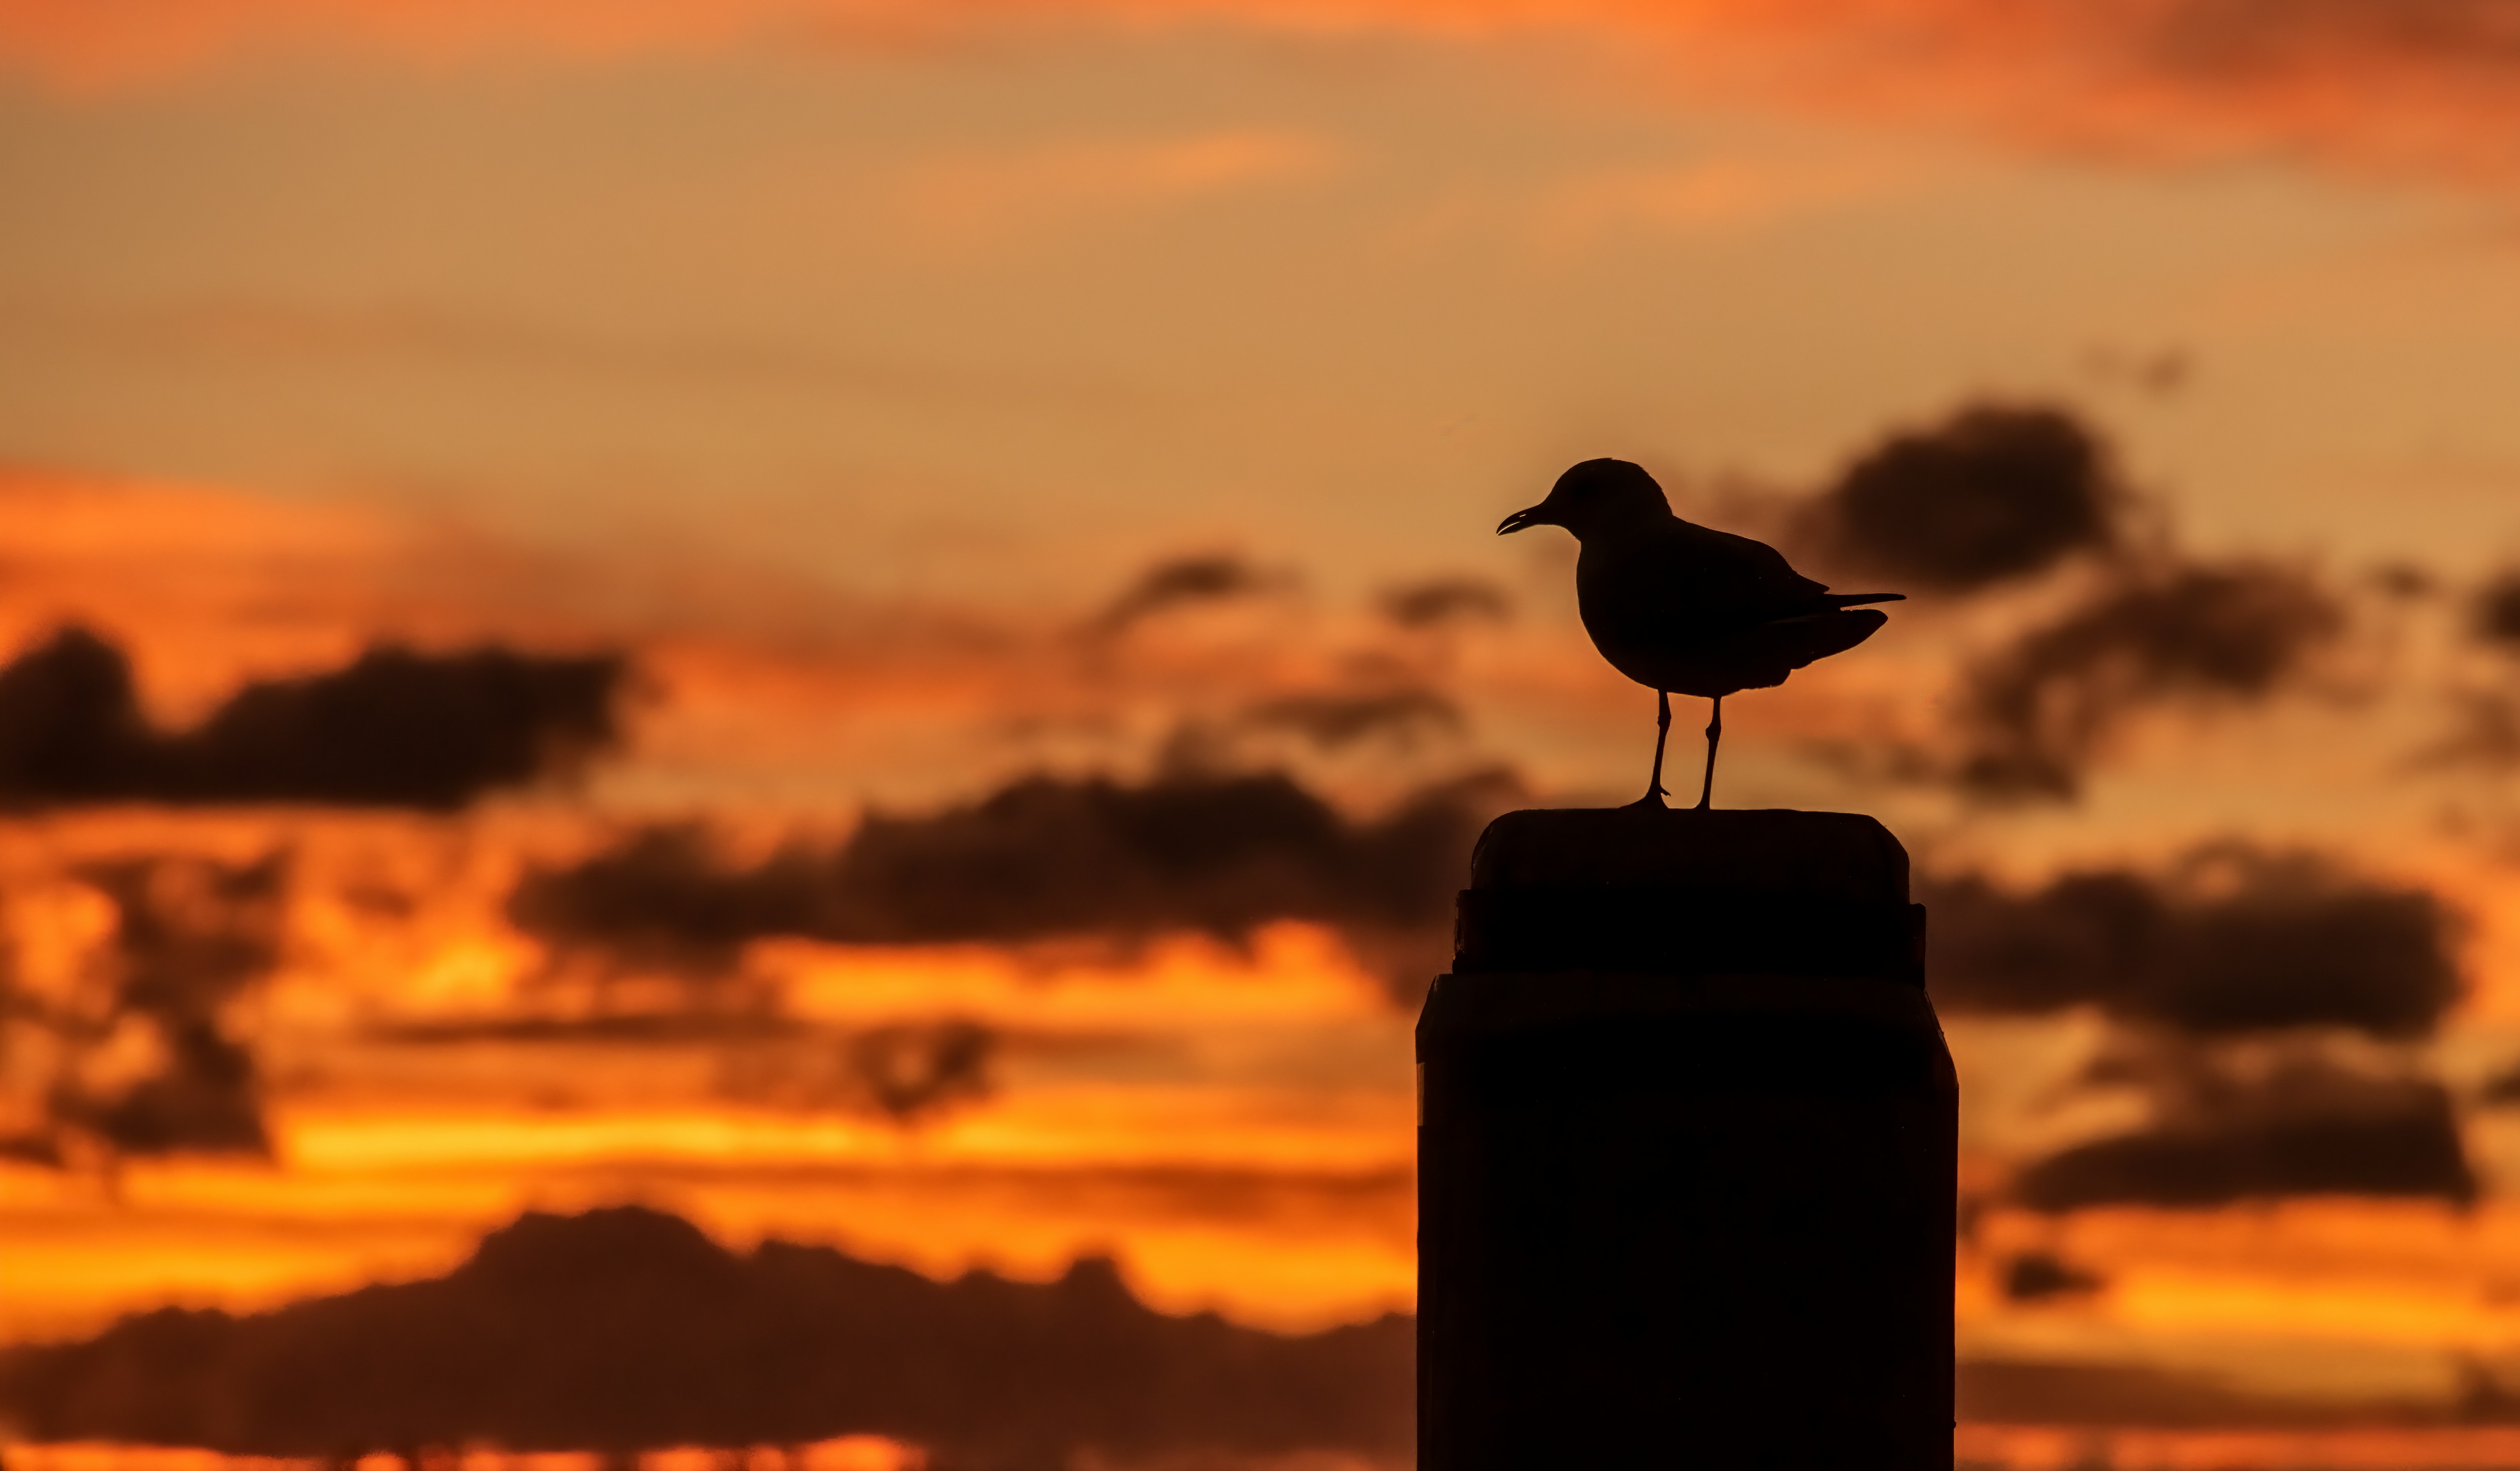 A seagull admires the start of a new day.